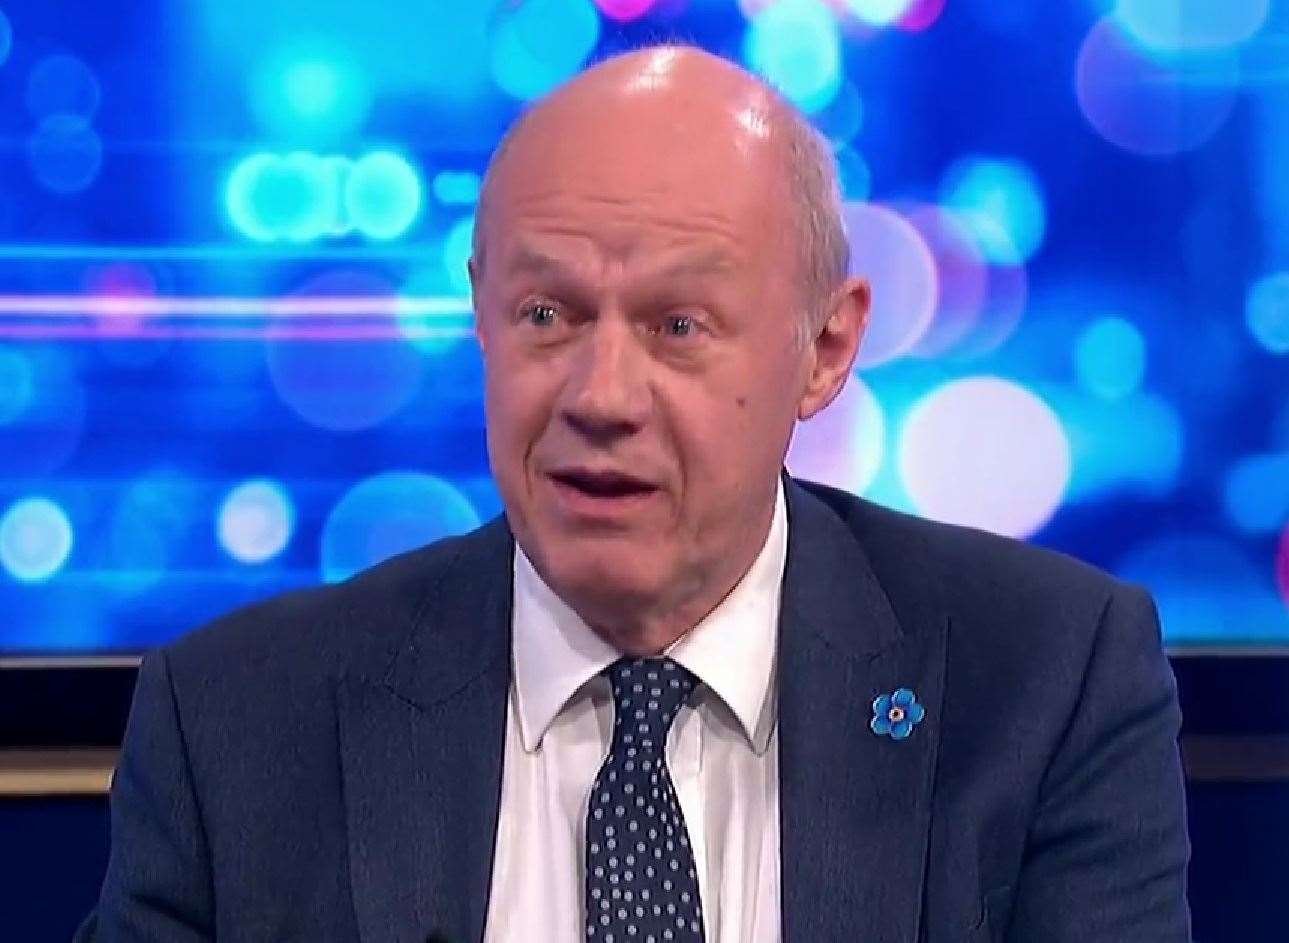 Ashford MP Damian Green speaking about swimming in sewage as a child on ITV's Peston show last night. Picture: ITV / Twitter